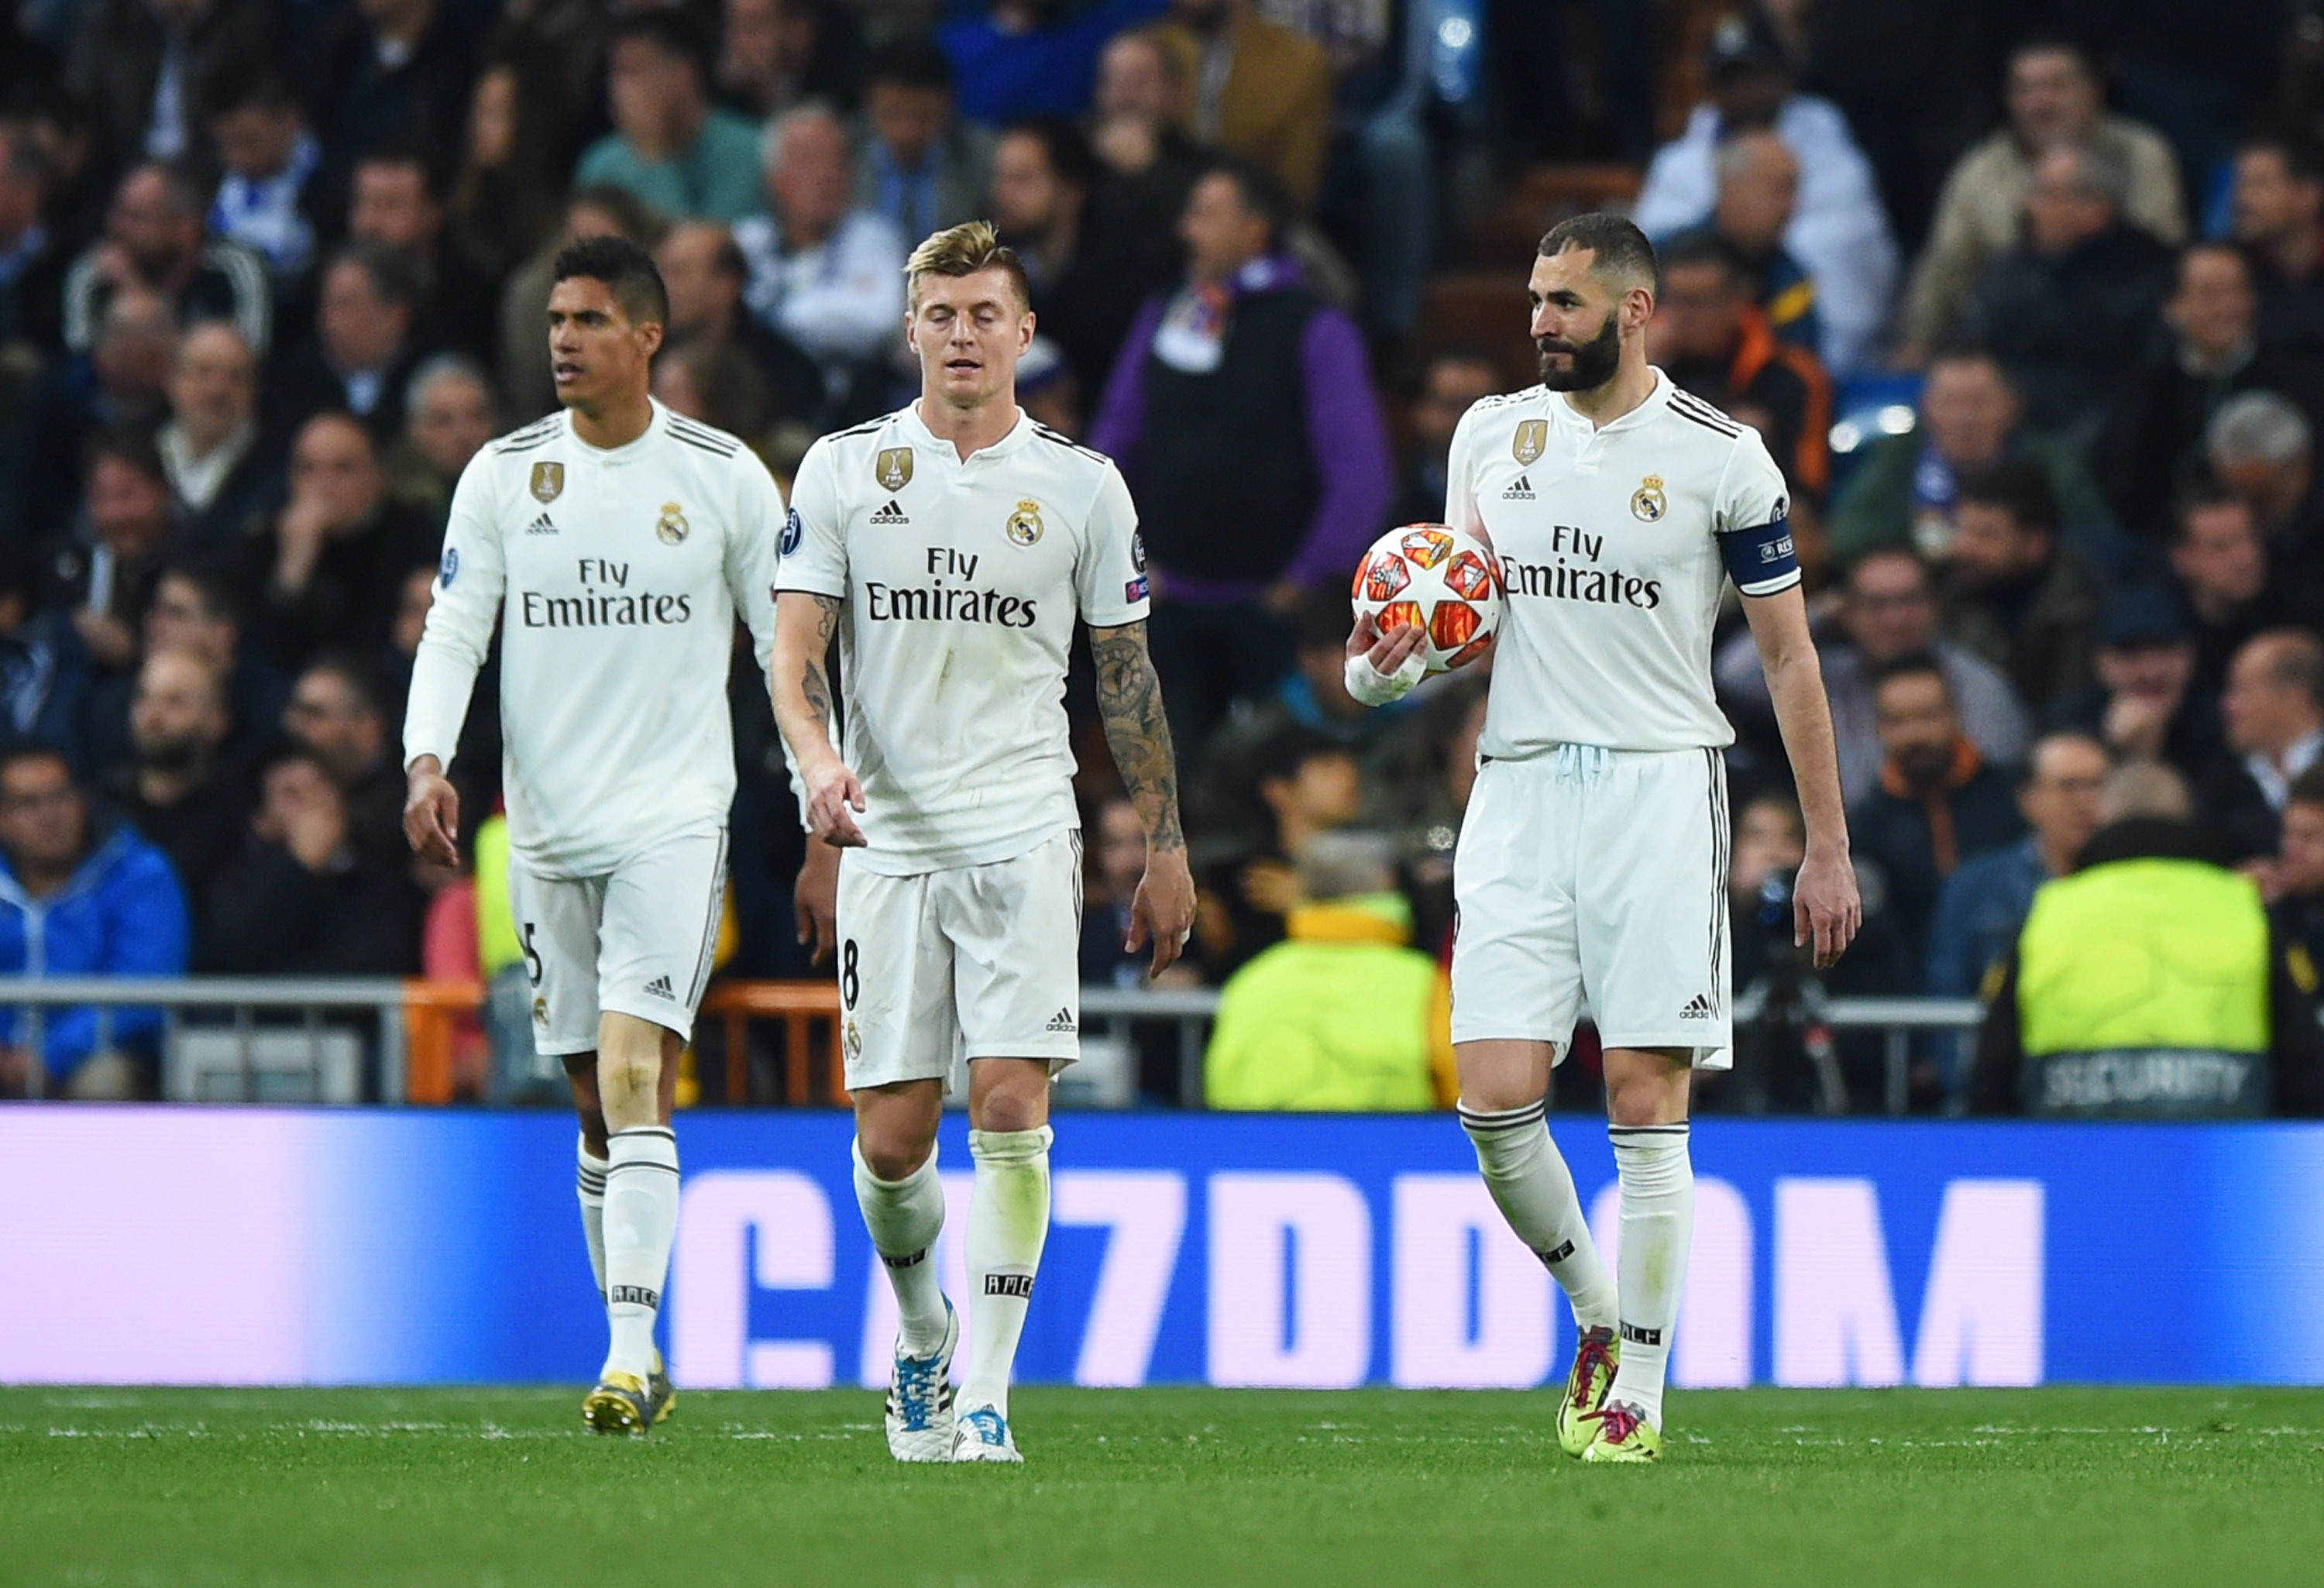 Real Madrid were blown away by a vibrant Ajax side (Photo by Denis Doyle/Getty Images)